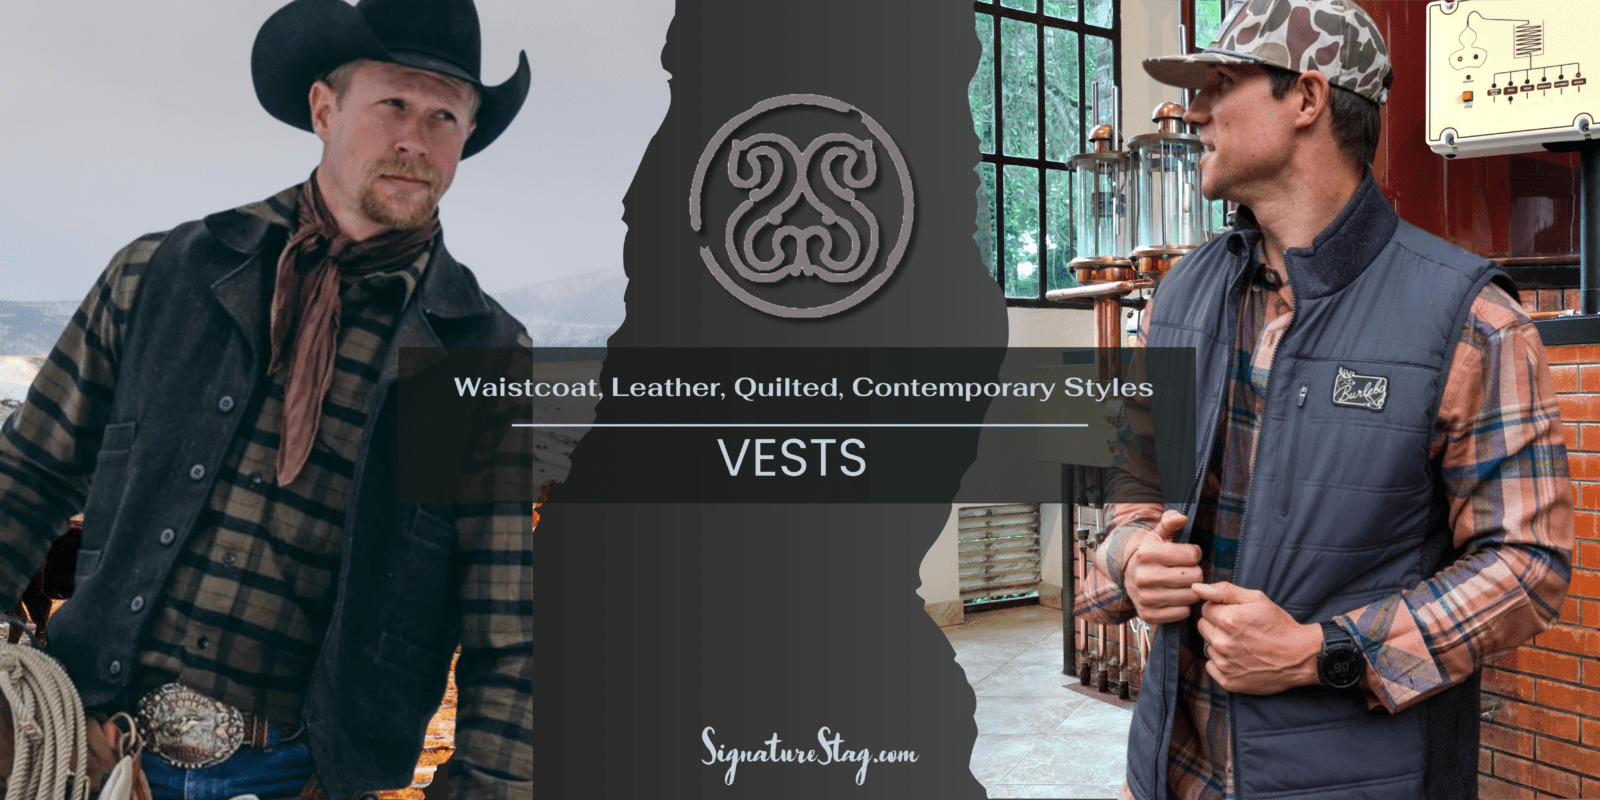 Find Premium Vest for Men in Lubbock and Midland Texas. Water-repellent and wind-resistant by Filson, GenTeal, 7Diamonds, Johnston & Murphy.